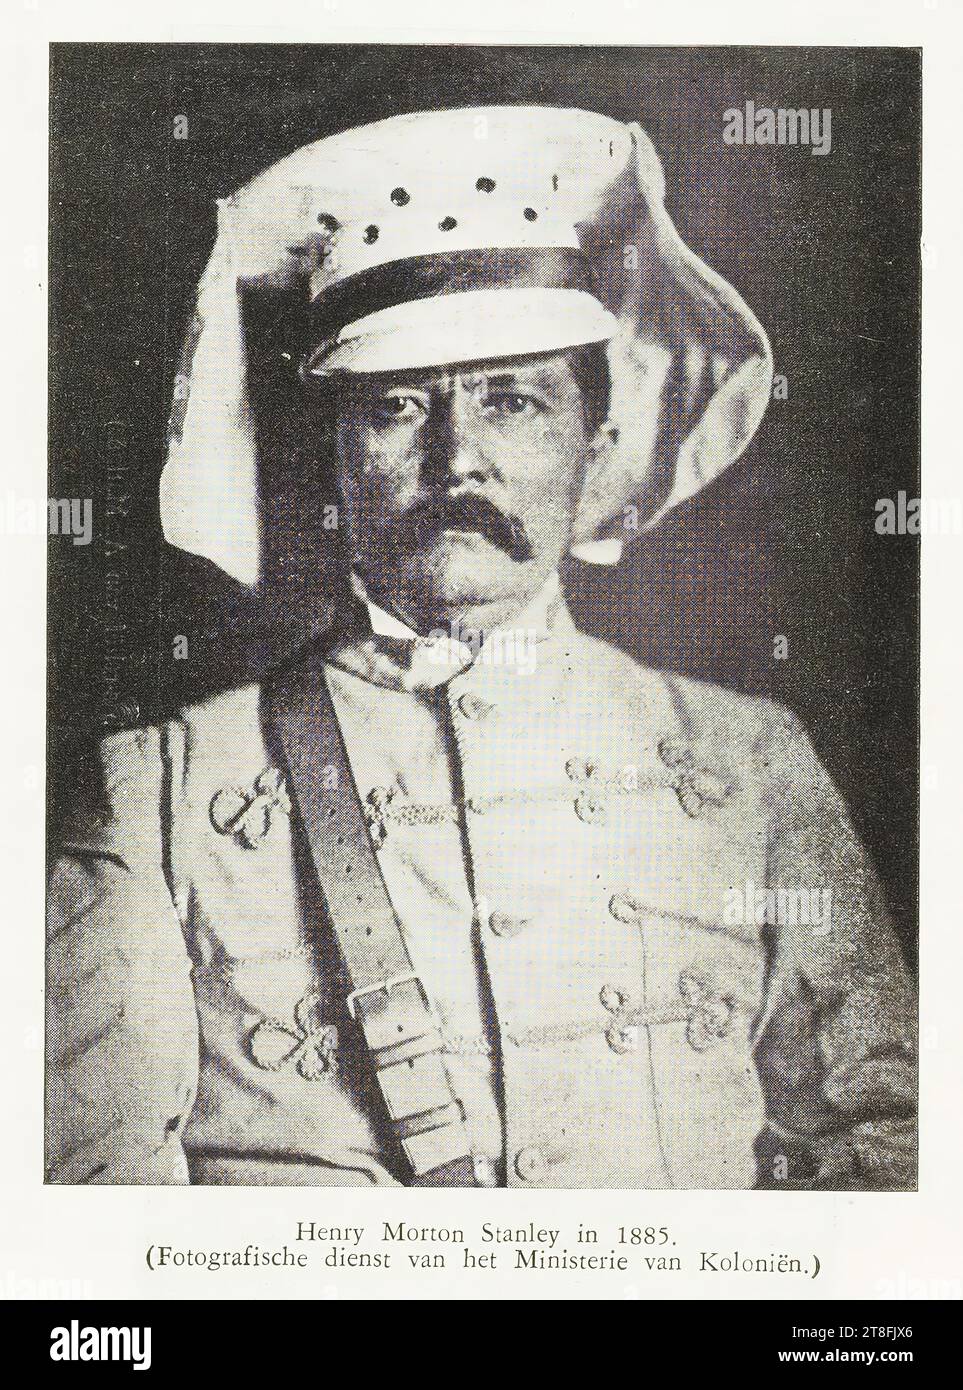 Henry Morton Stanley in 1885, (Photographic service of the Ministry of Colonies.). illustration from: MALCORPS Armand: The giant of the Congo (Davidsfonds Volkreeks, 252) Davidsfonds, 1934 Stock Photo